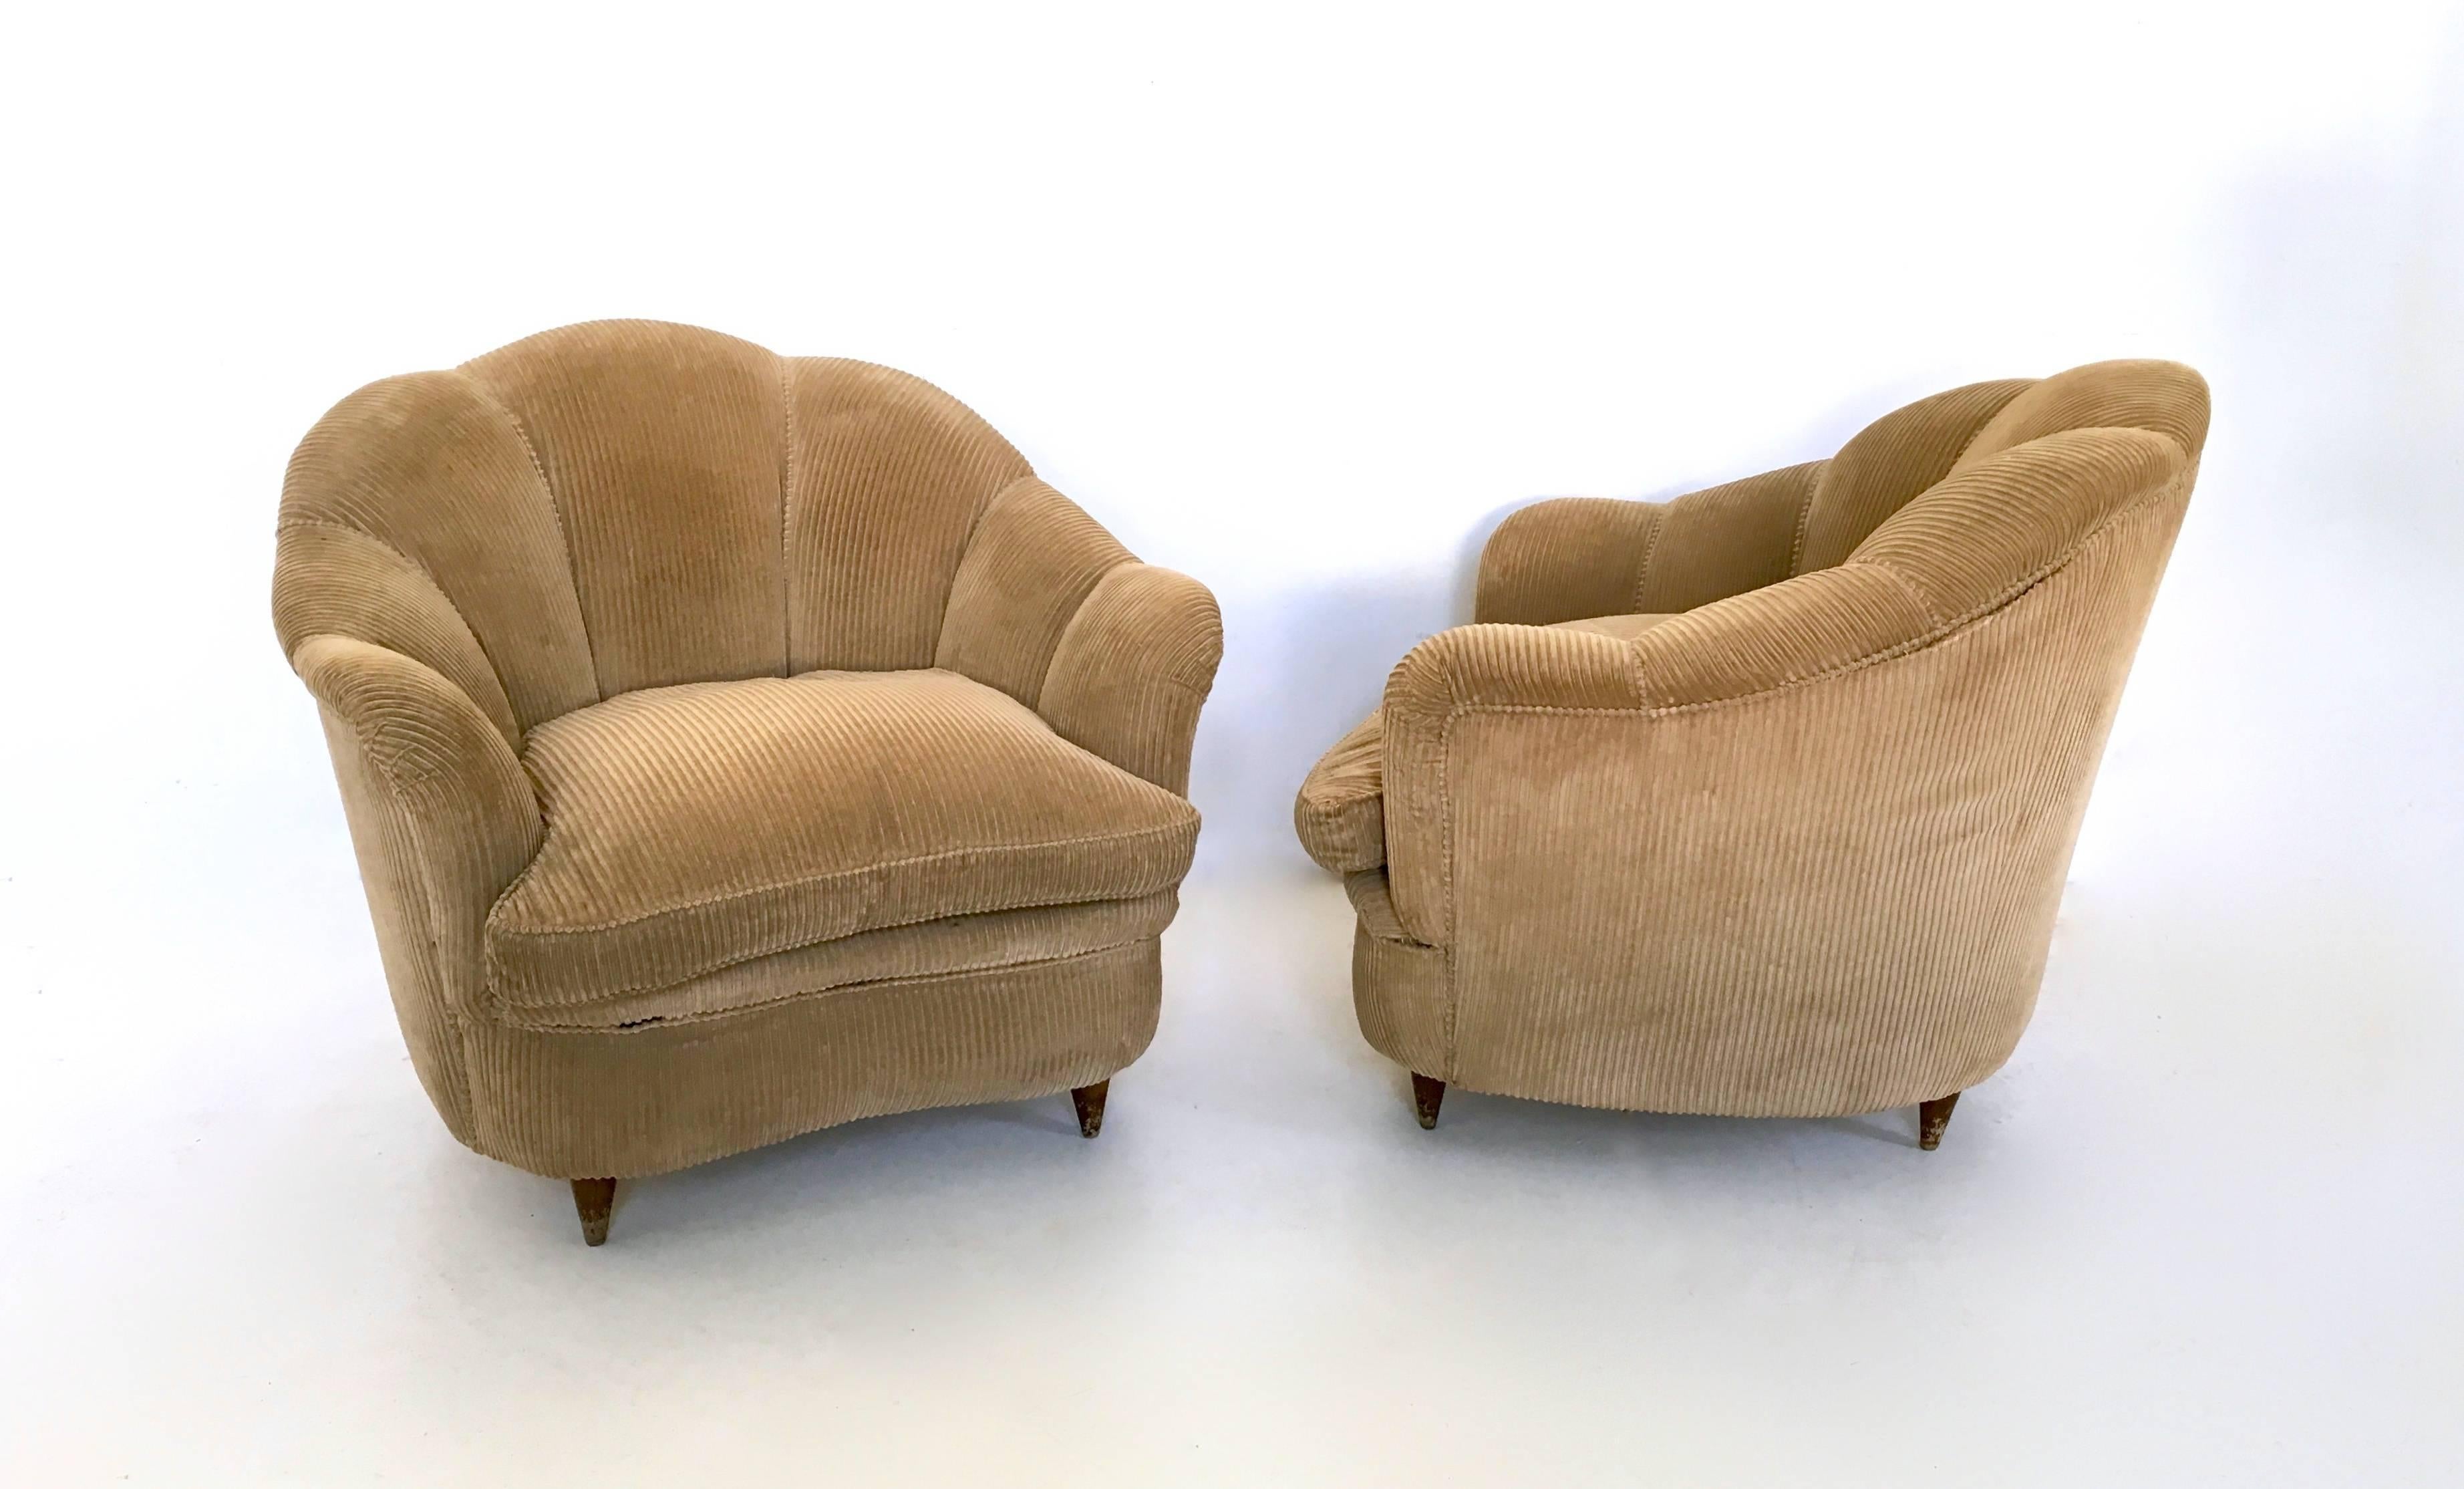 Mid-20th Century Pair of Italian Velvet Armchairs Attributed to Guglielmo Ulrich, 1940s-1950s